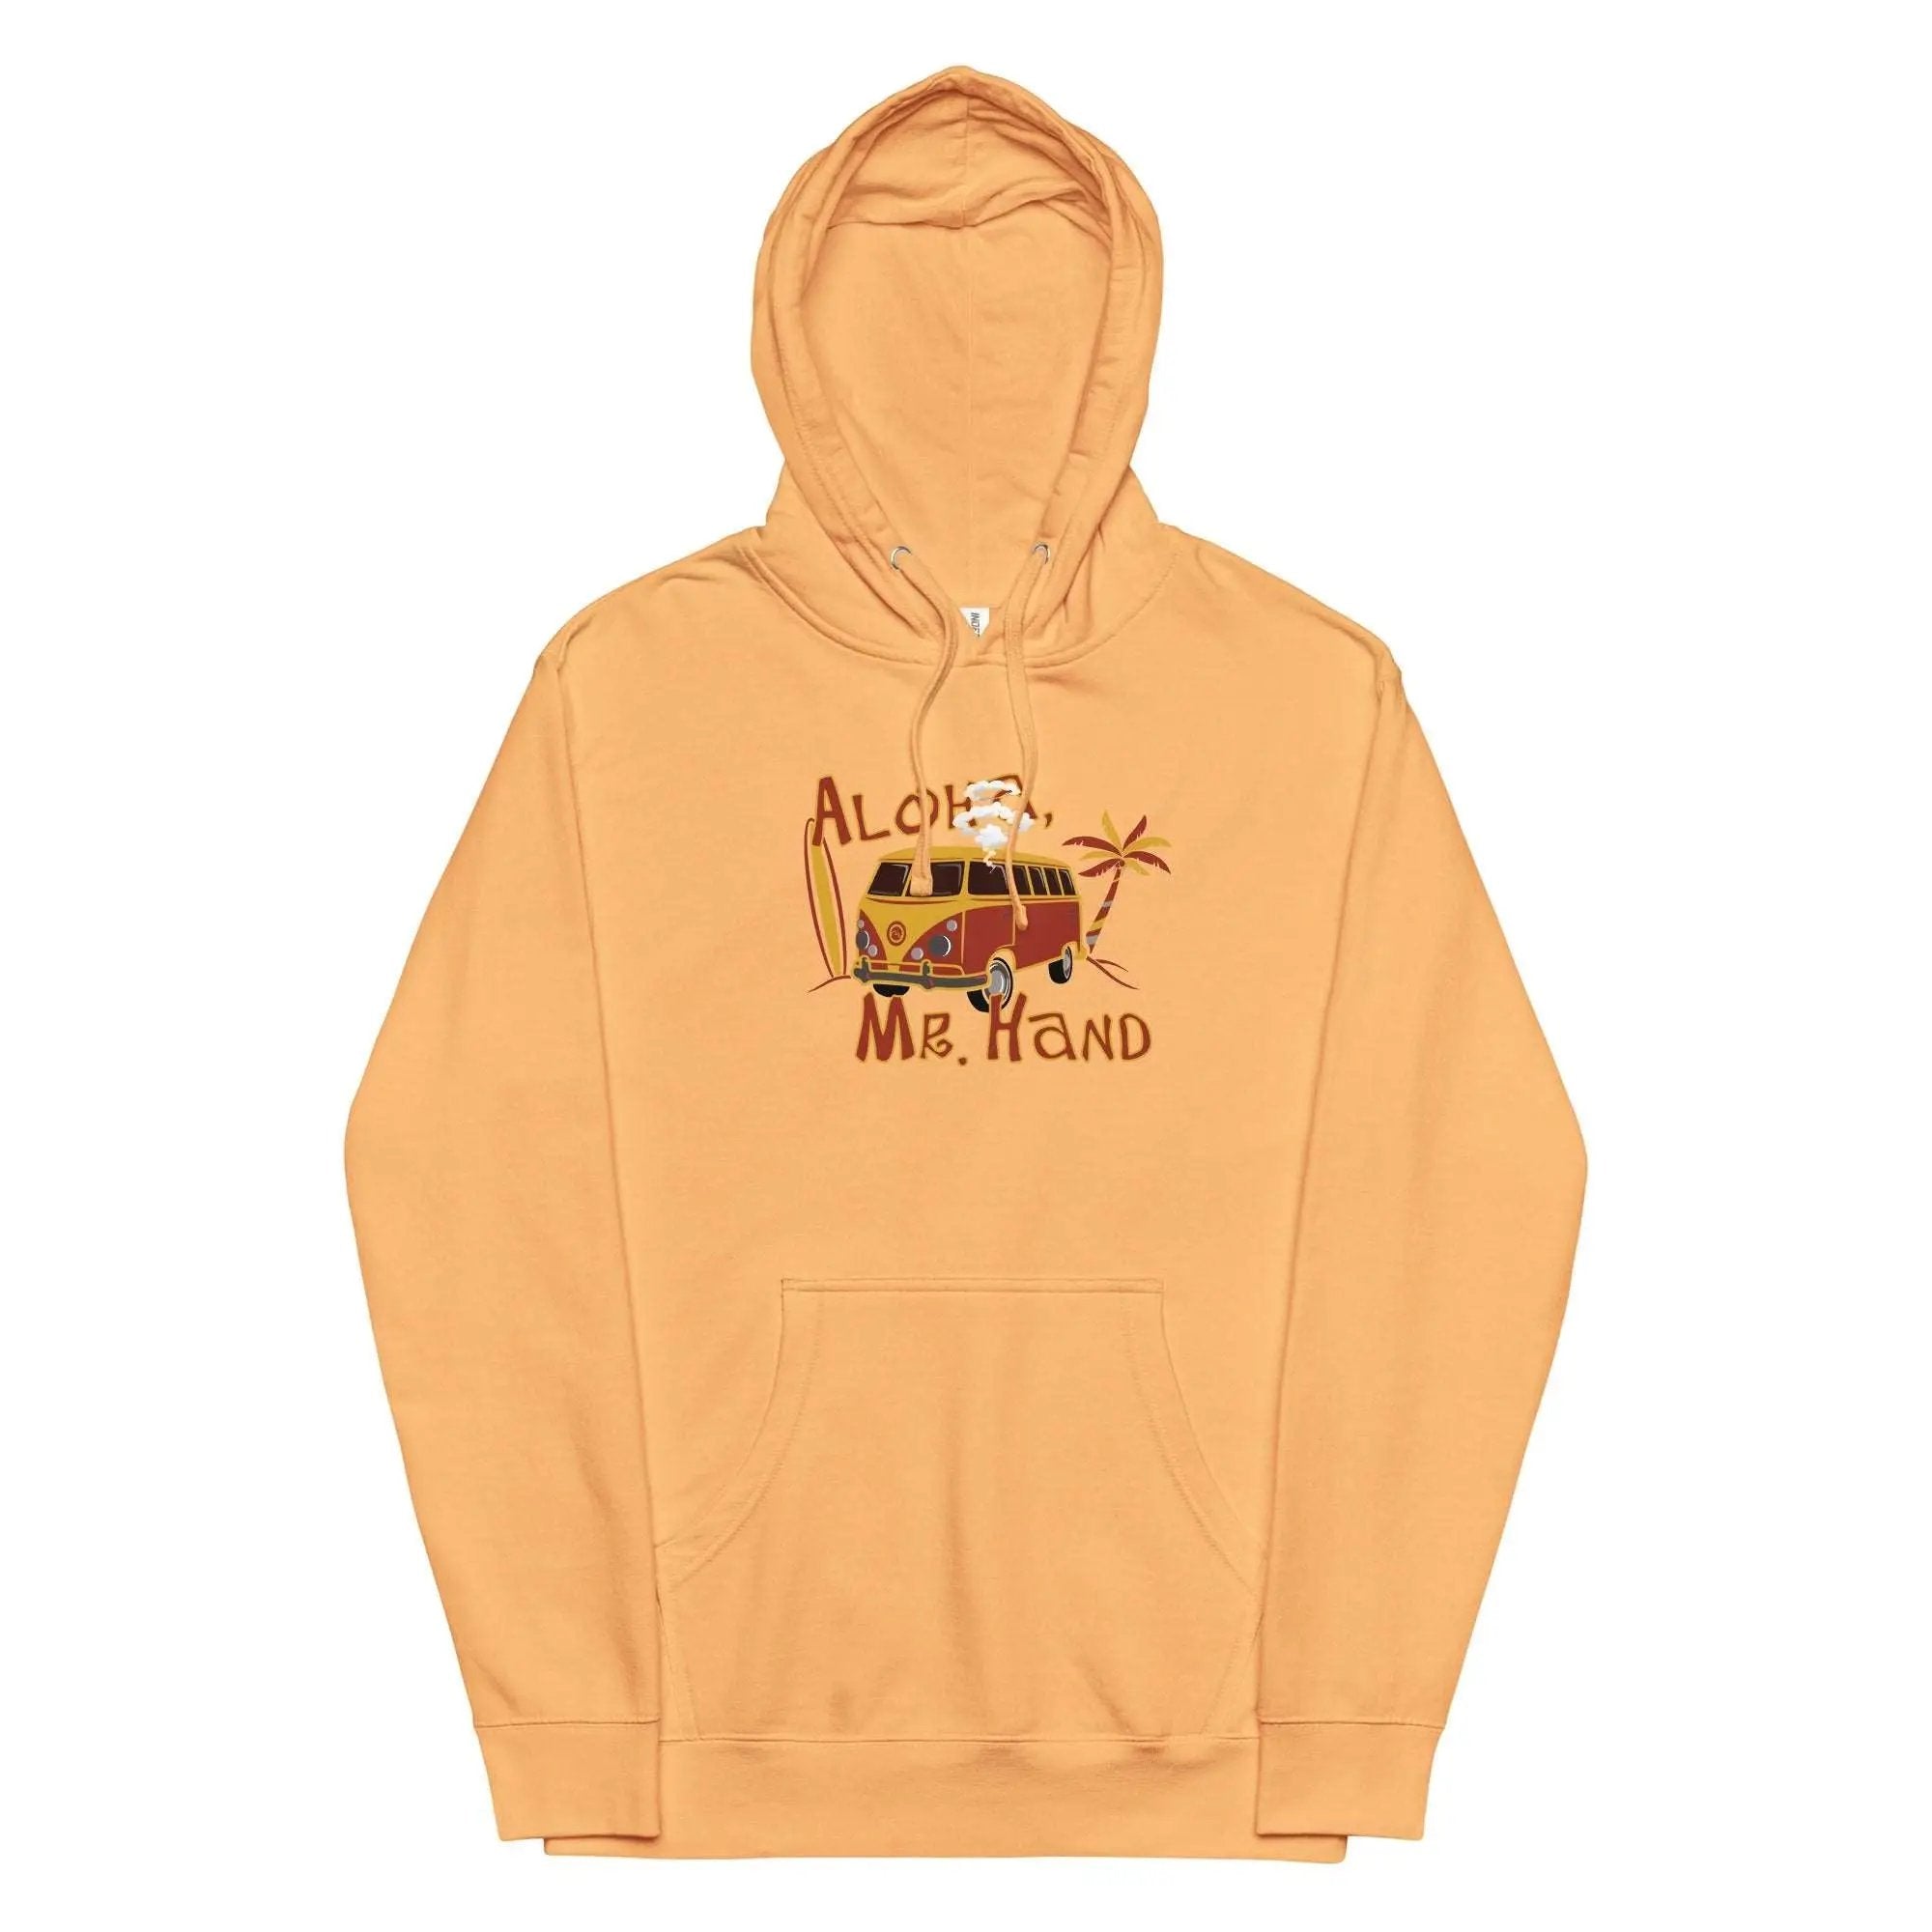 an orange hoodie with an image of a van on it